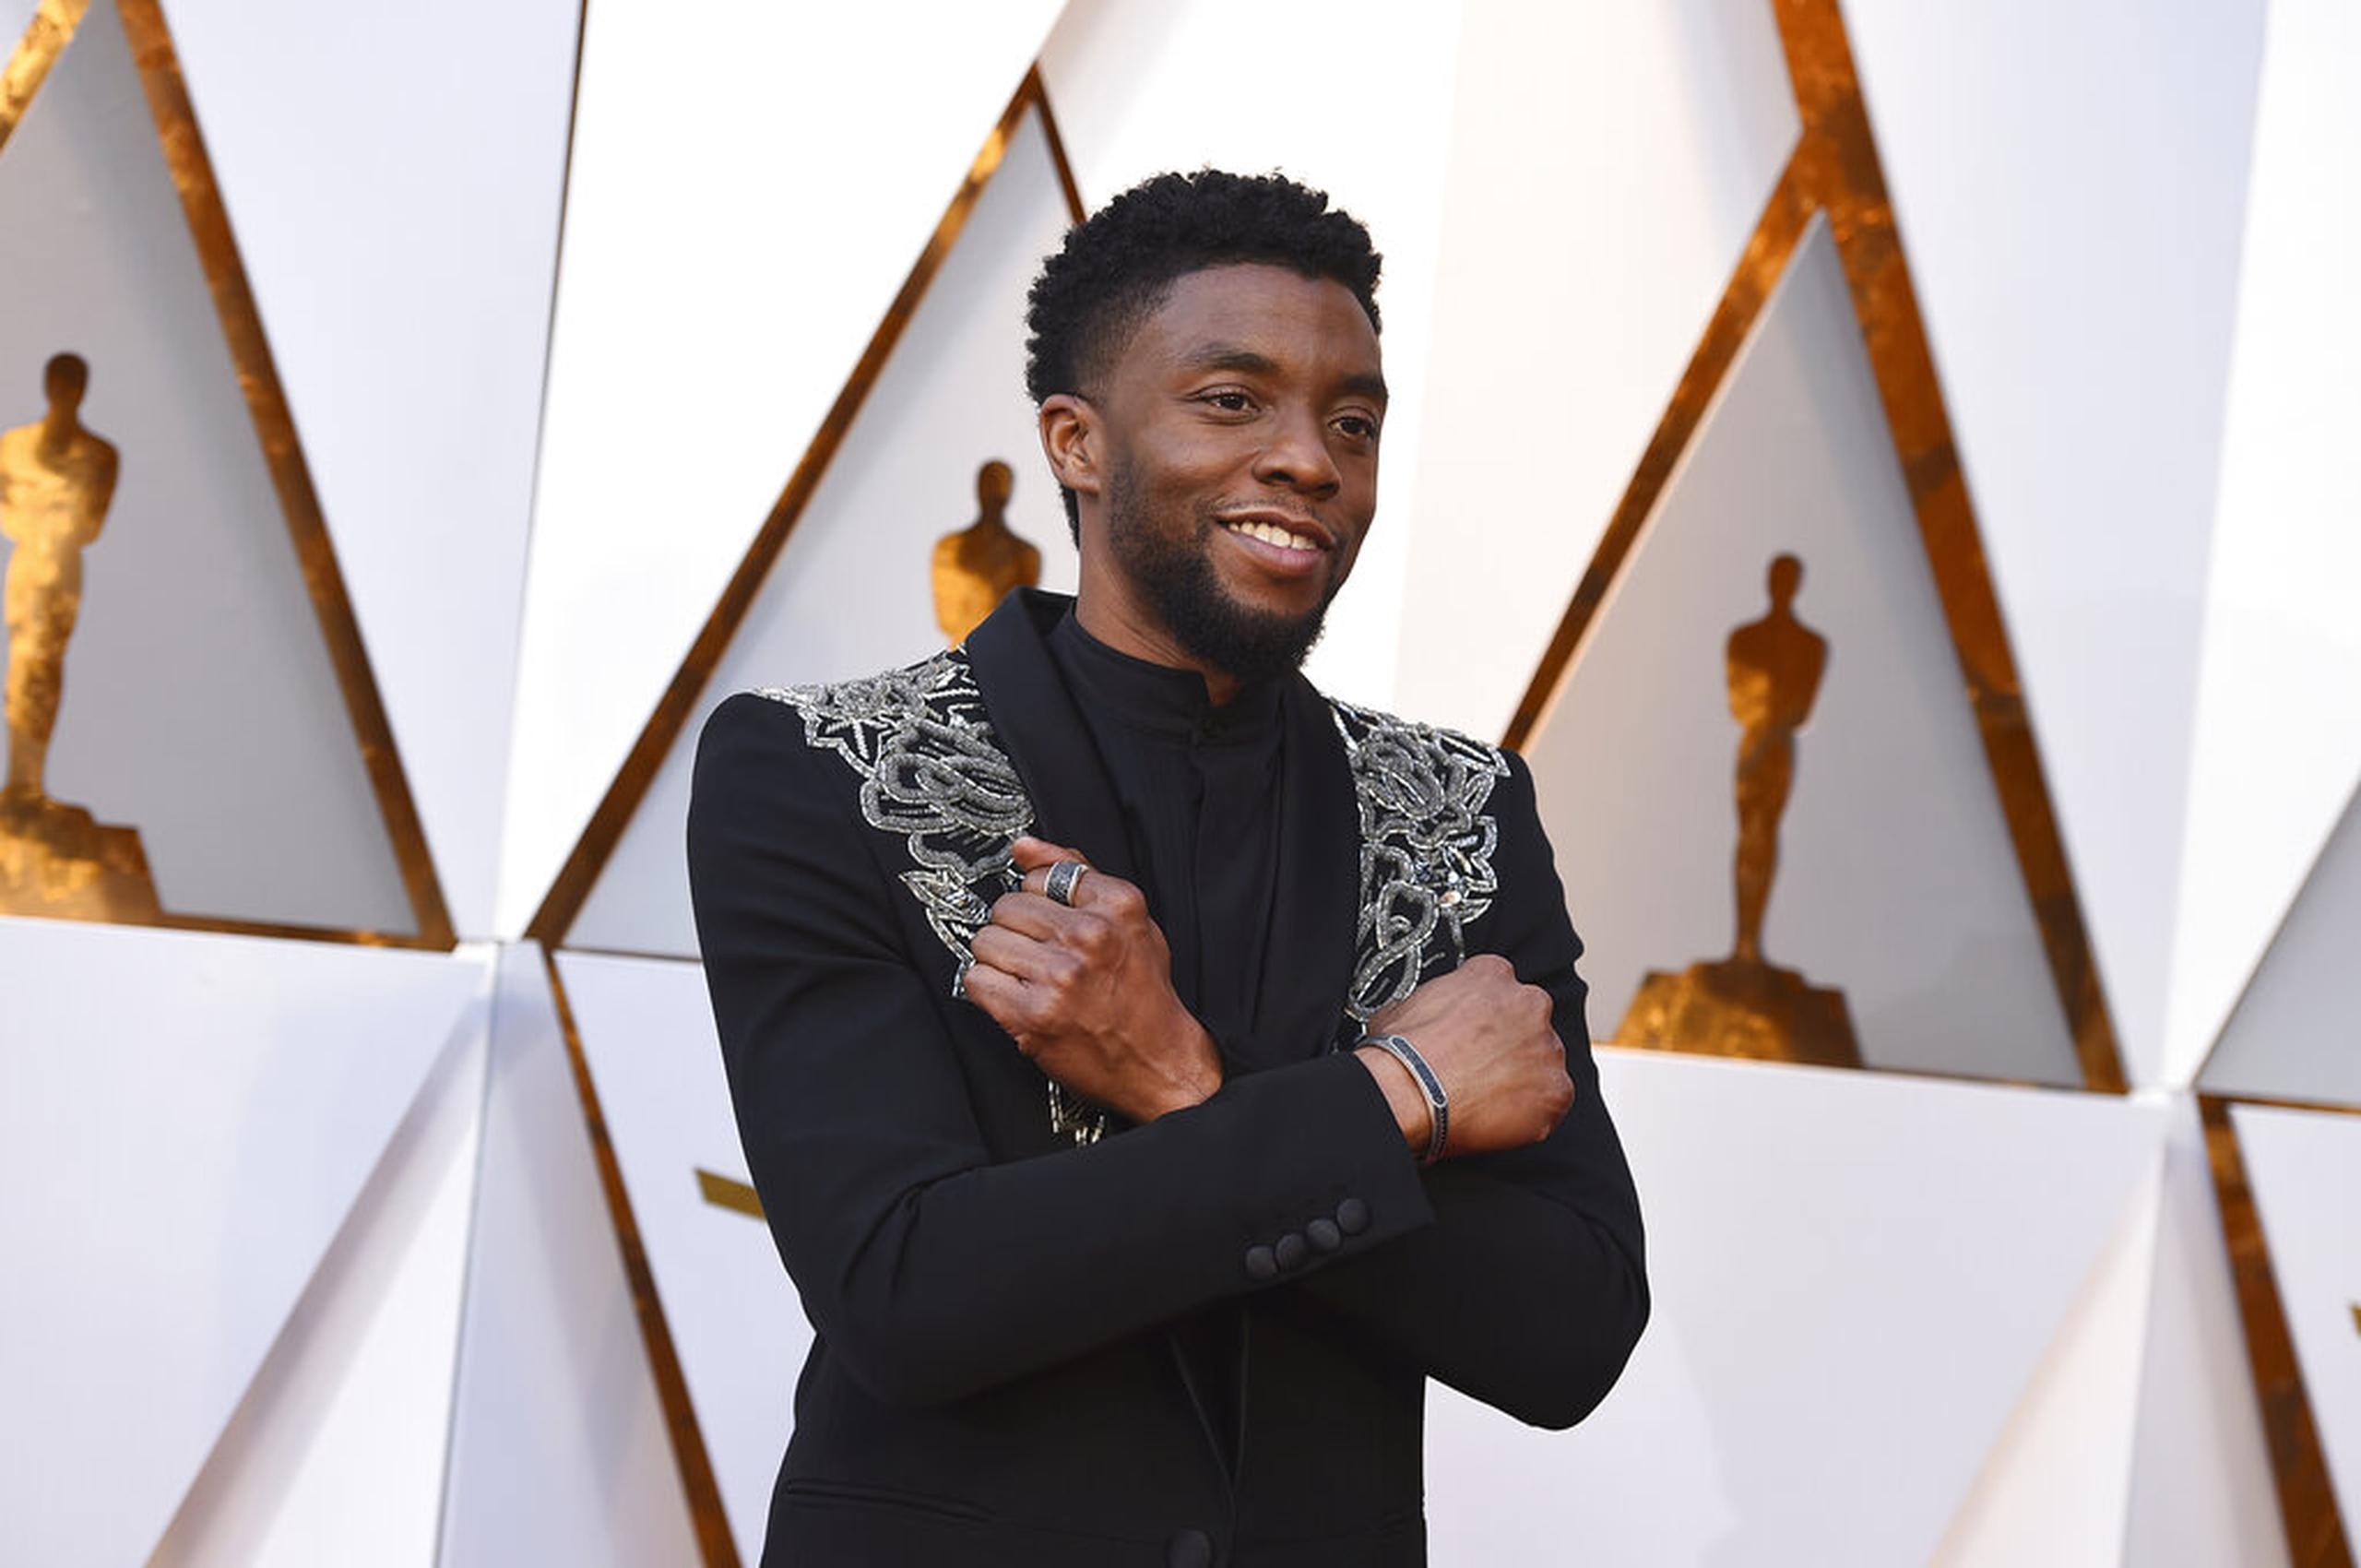 FILE - In this March 4, 2018 file photo, Chadwick Boseman arrives at the Oscars at the Dolby Theatre in Los Angeles.   Actor Chadwick Boseman, who played Black icons Jackie Robinson and James Brown before finding fame as the regal Black Panther in the Marvel cinematic universe, has died of cancer. His representative says Boseman died Friday, Aug. 28, 2020 in Los Angeles after a four-year battle with colon cancer. He was 43.  (Photo by Jordan Strauss/Invision/AP, File)